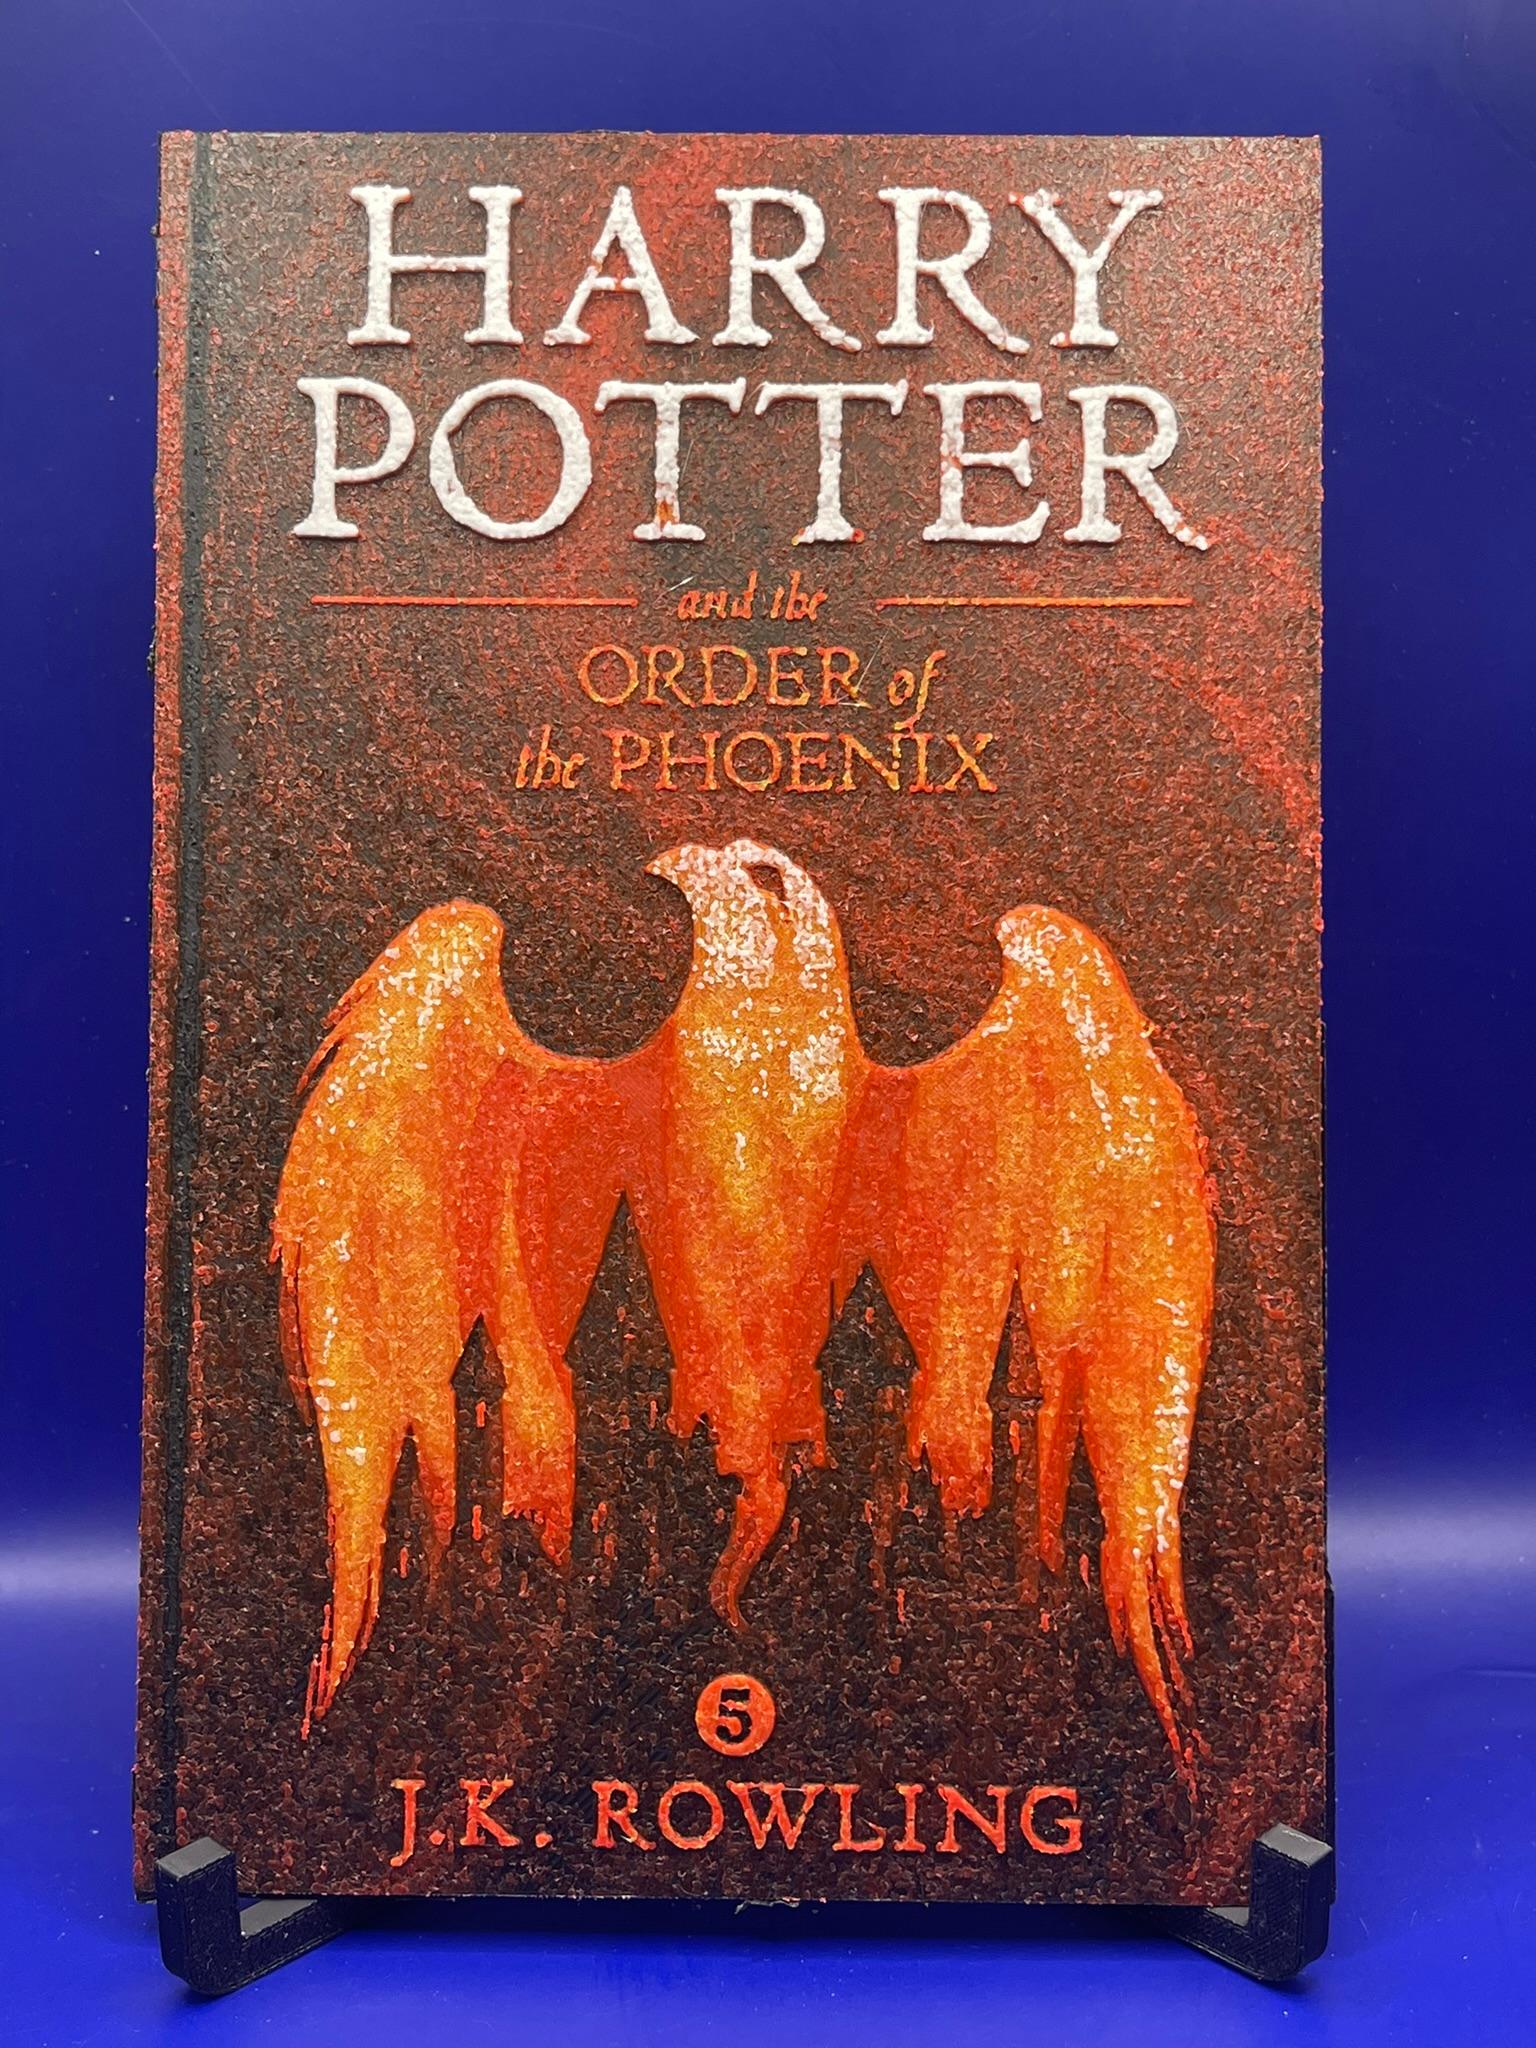 Harry Potter and the Order of the Phoenix Book Cover Fan Art 3d model